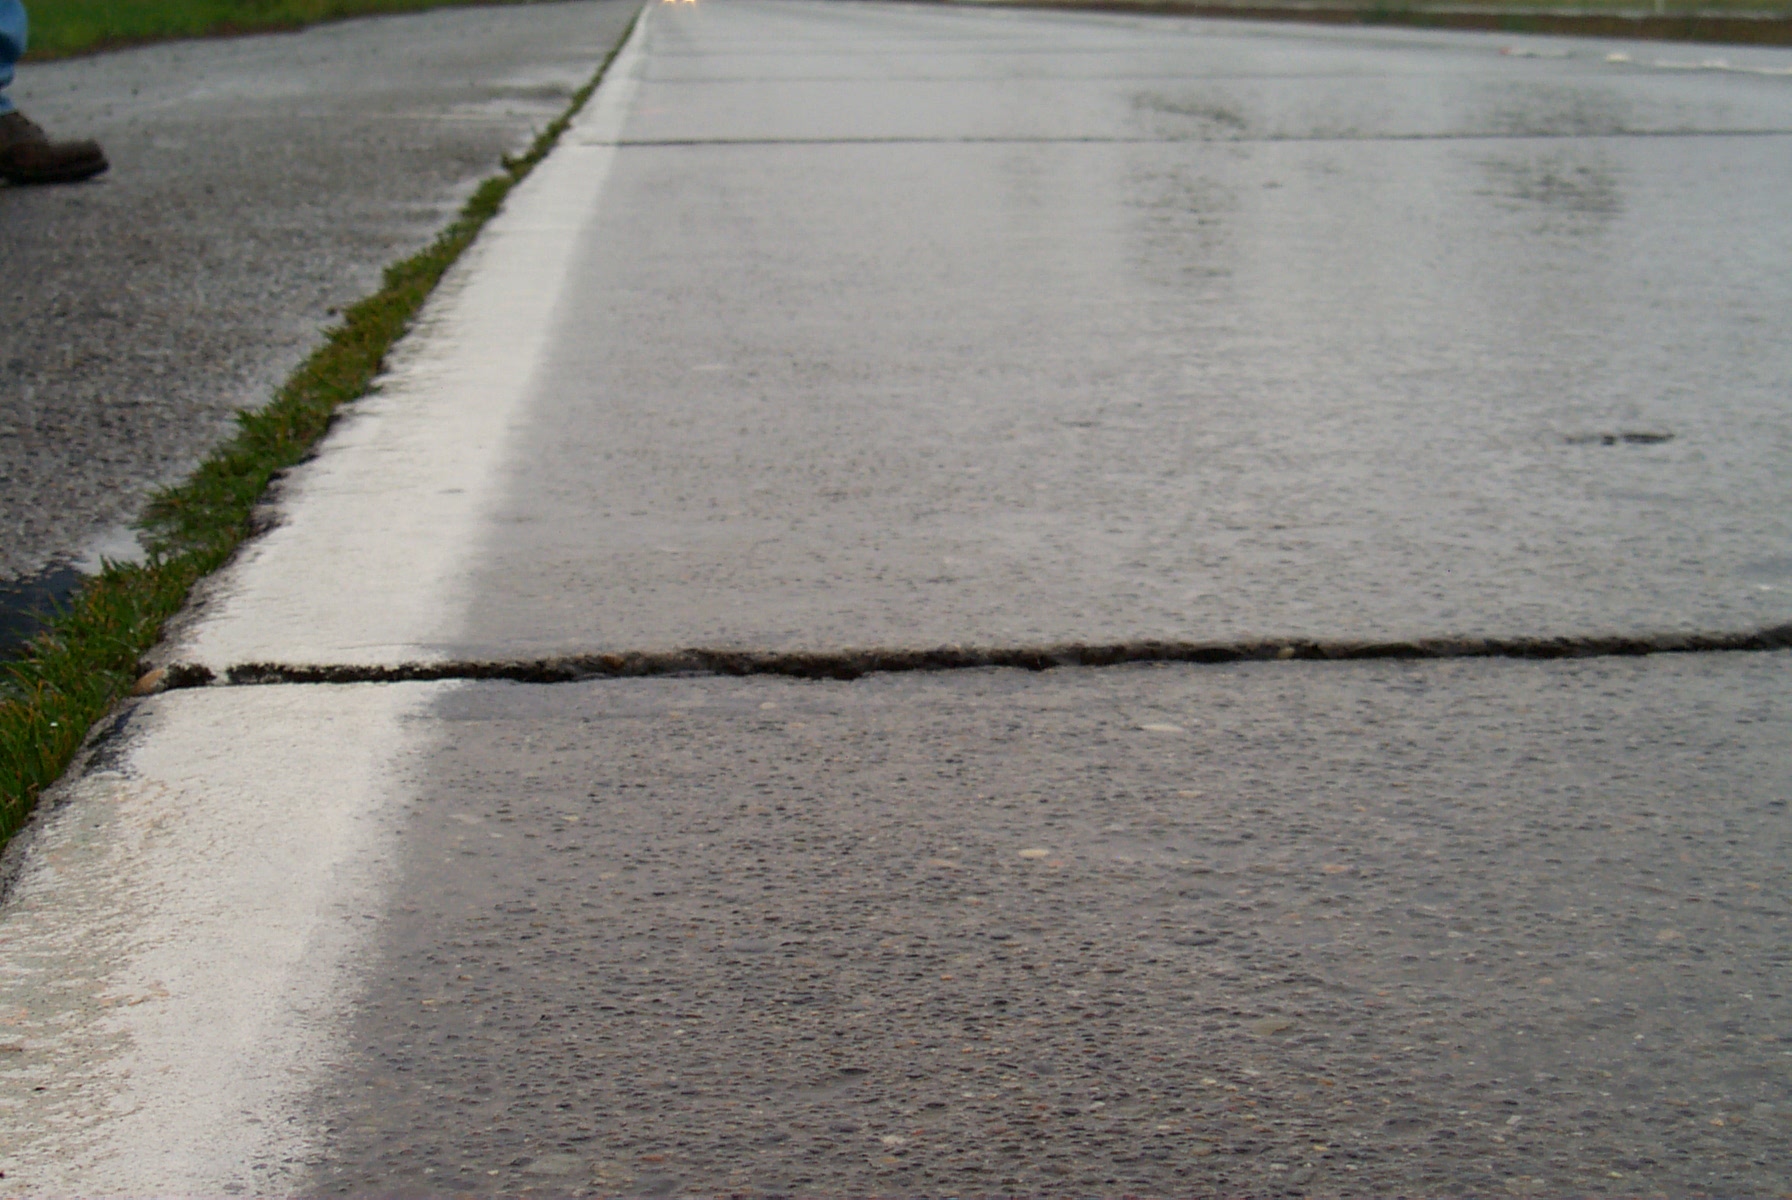 Sand in pavement joints can lead to the faulting shown here.